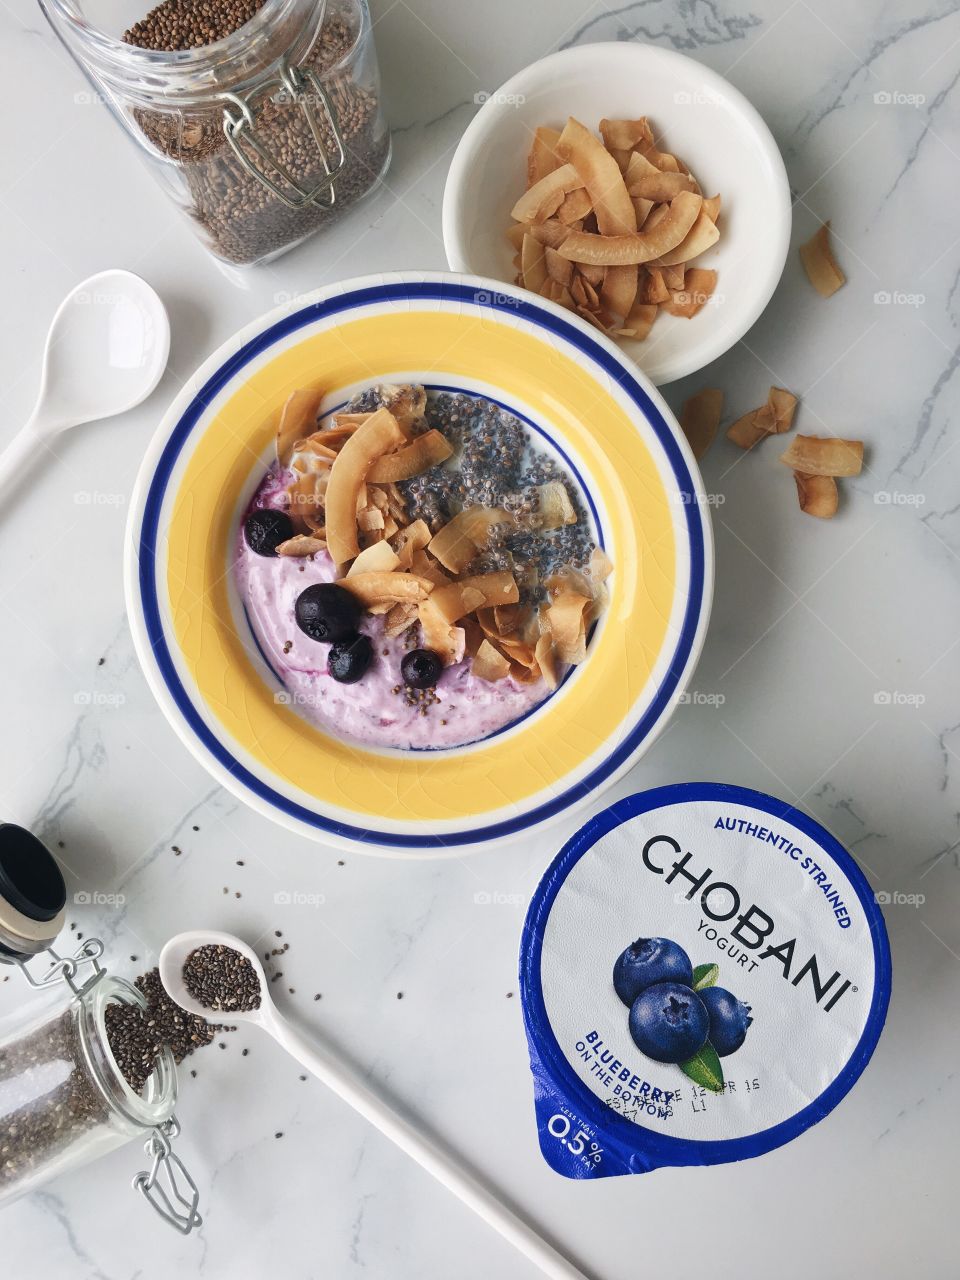 Made with Chobani : Healthy breakfast bowl blueberry yogurt with chia pudding.
(CHOBANI Blueberry, chia seed, milk, perilla seed and coconut chips)